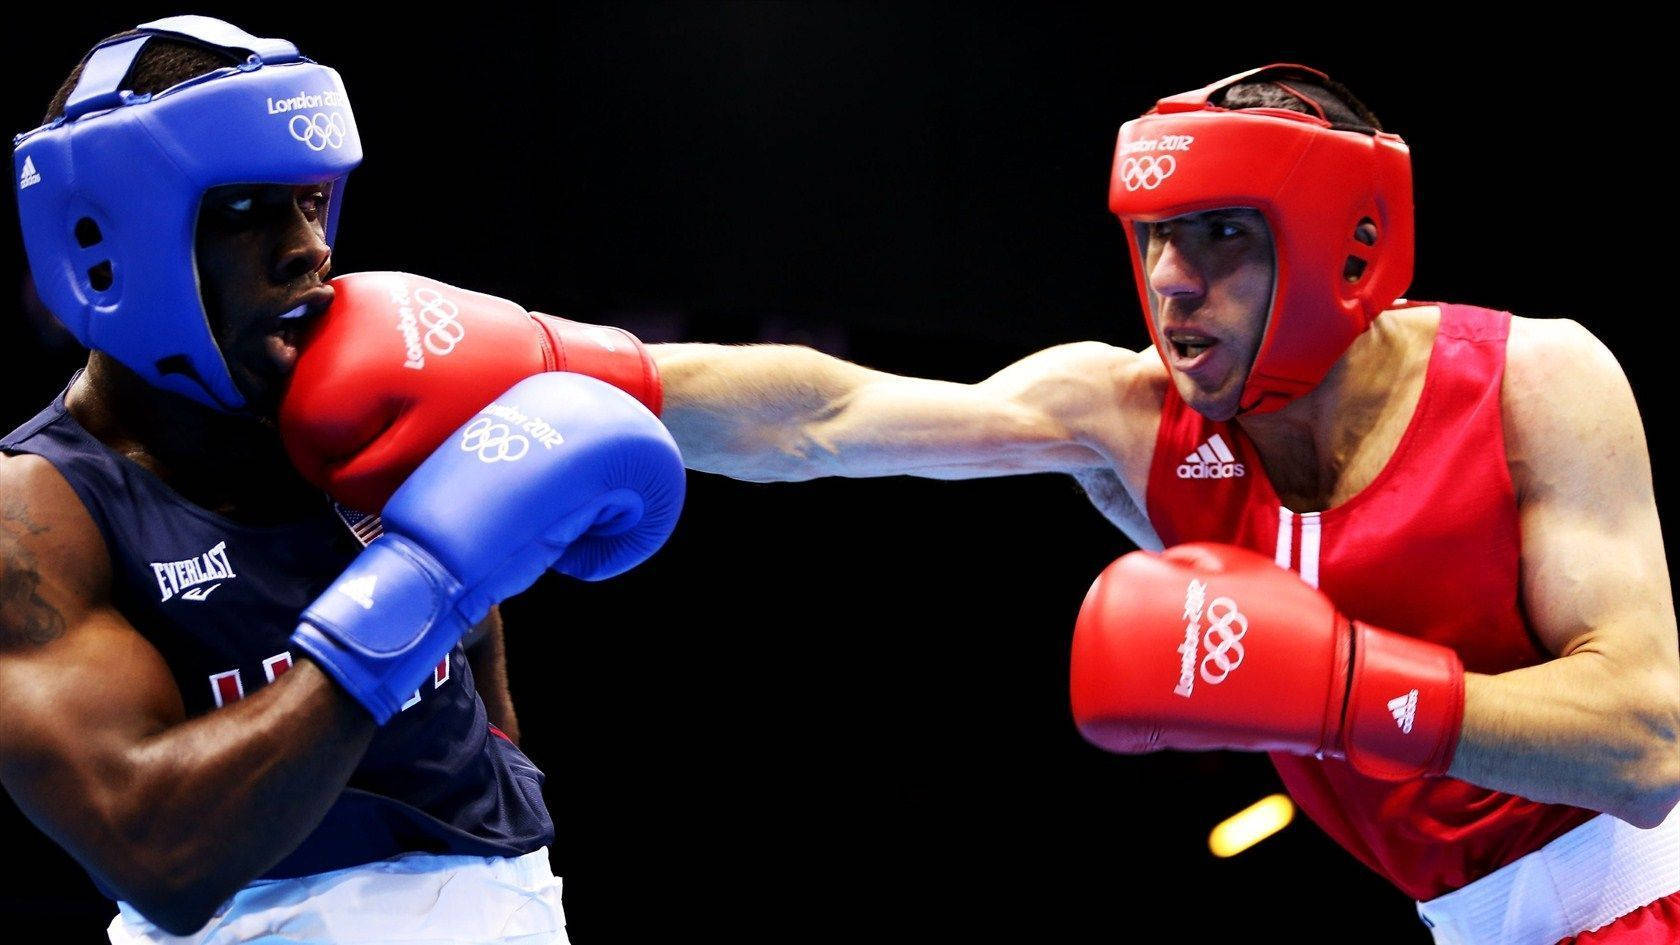 Two Boxers In Blue And Red Fighting In A Boxing Ring Background